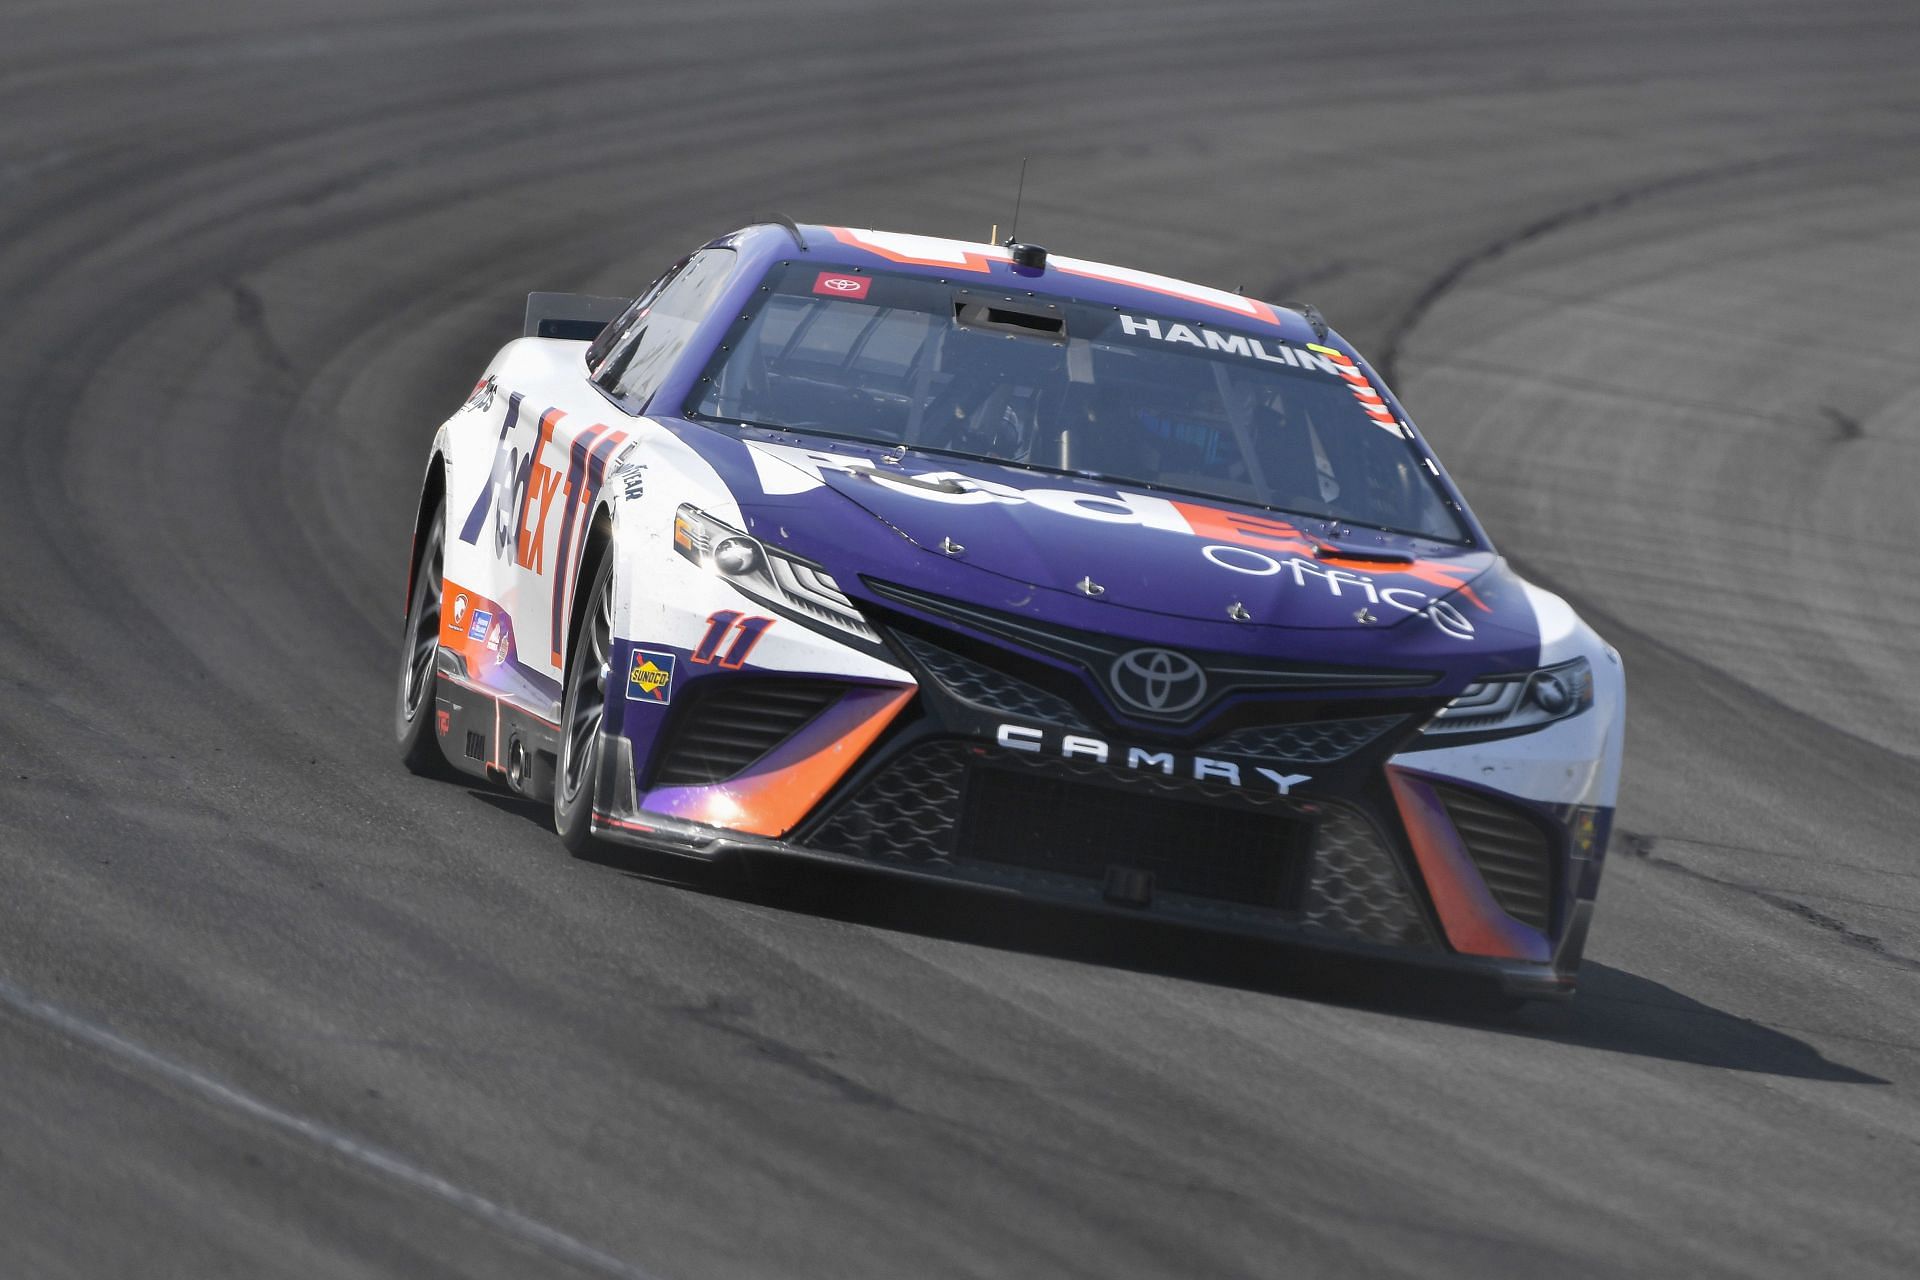 Denny Hamlin drives during the 2022 NASCAR Cup Series M&amp;M&#039;s Fan Appreciation 400 at Pocono Raceway in Long Pond, Pennsylvania. (Photo by Logan Riely/Getty Images)